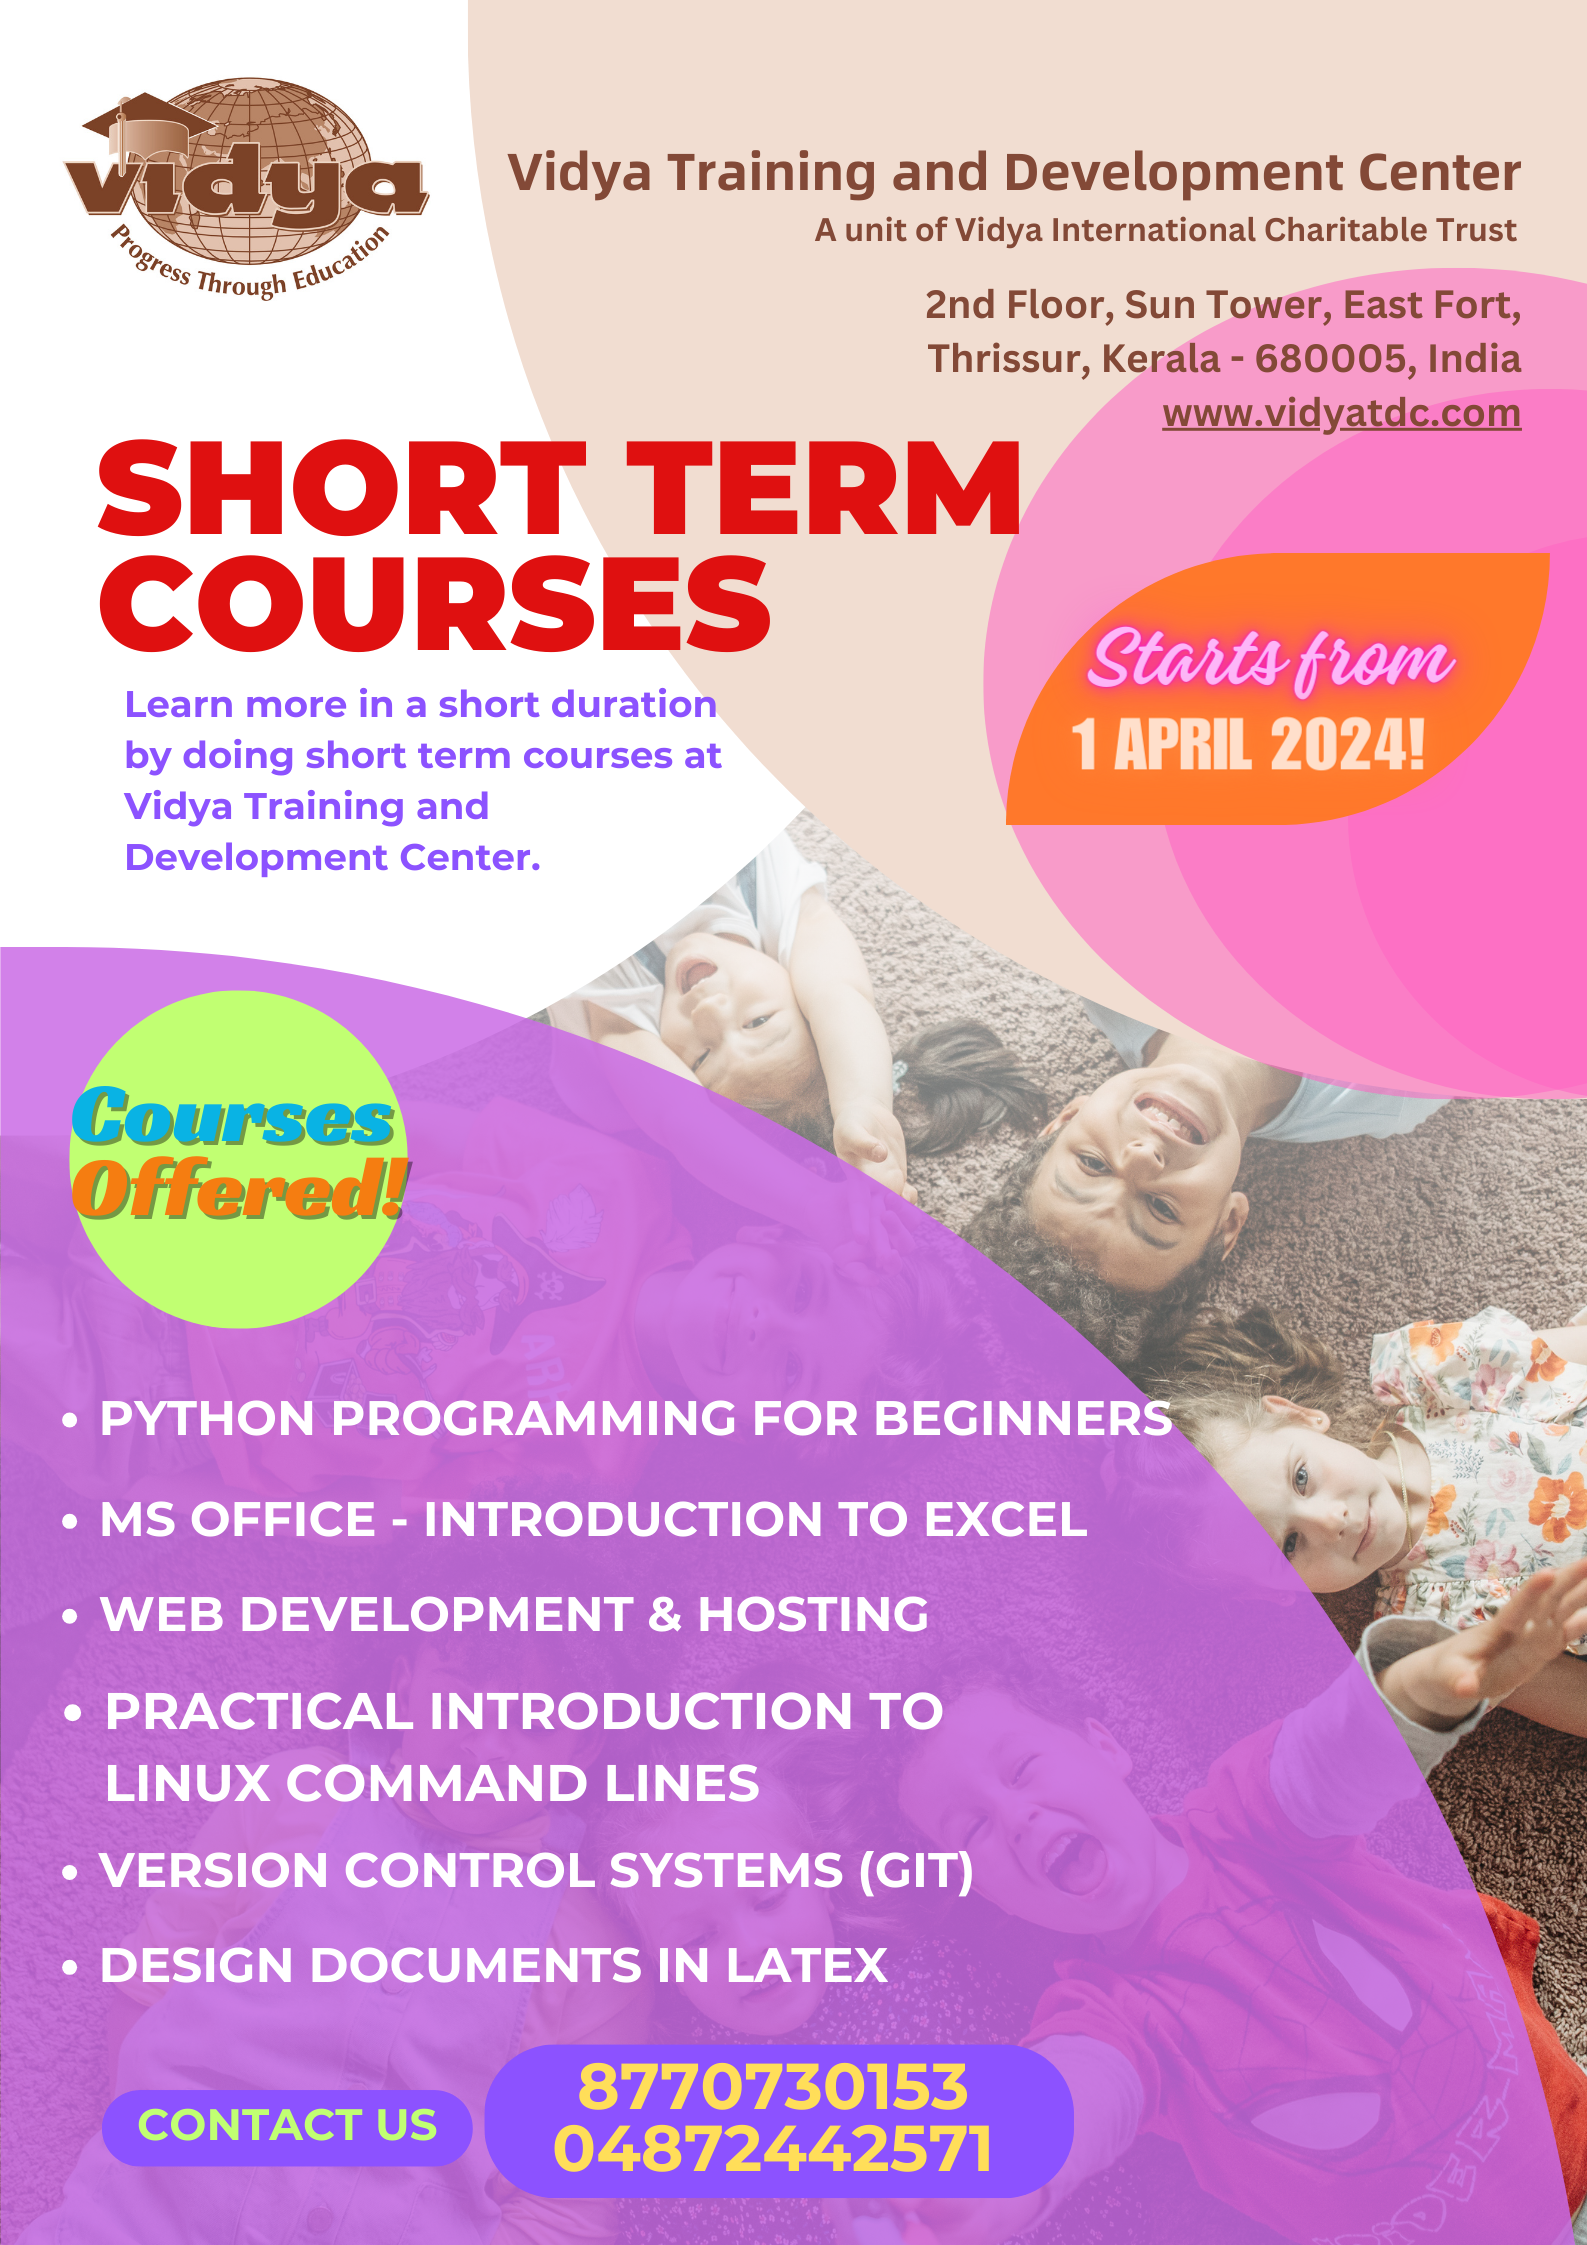 Short Term Courses at VTDC